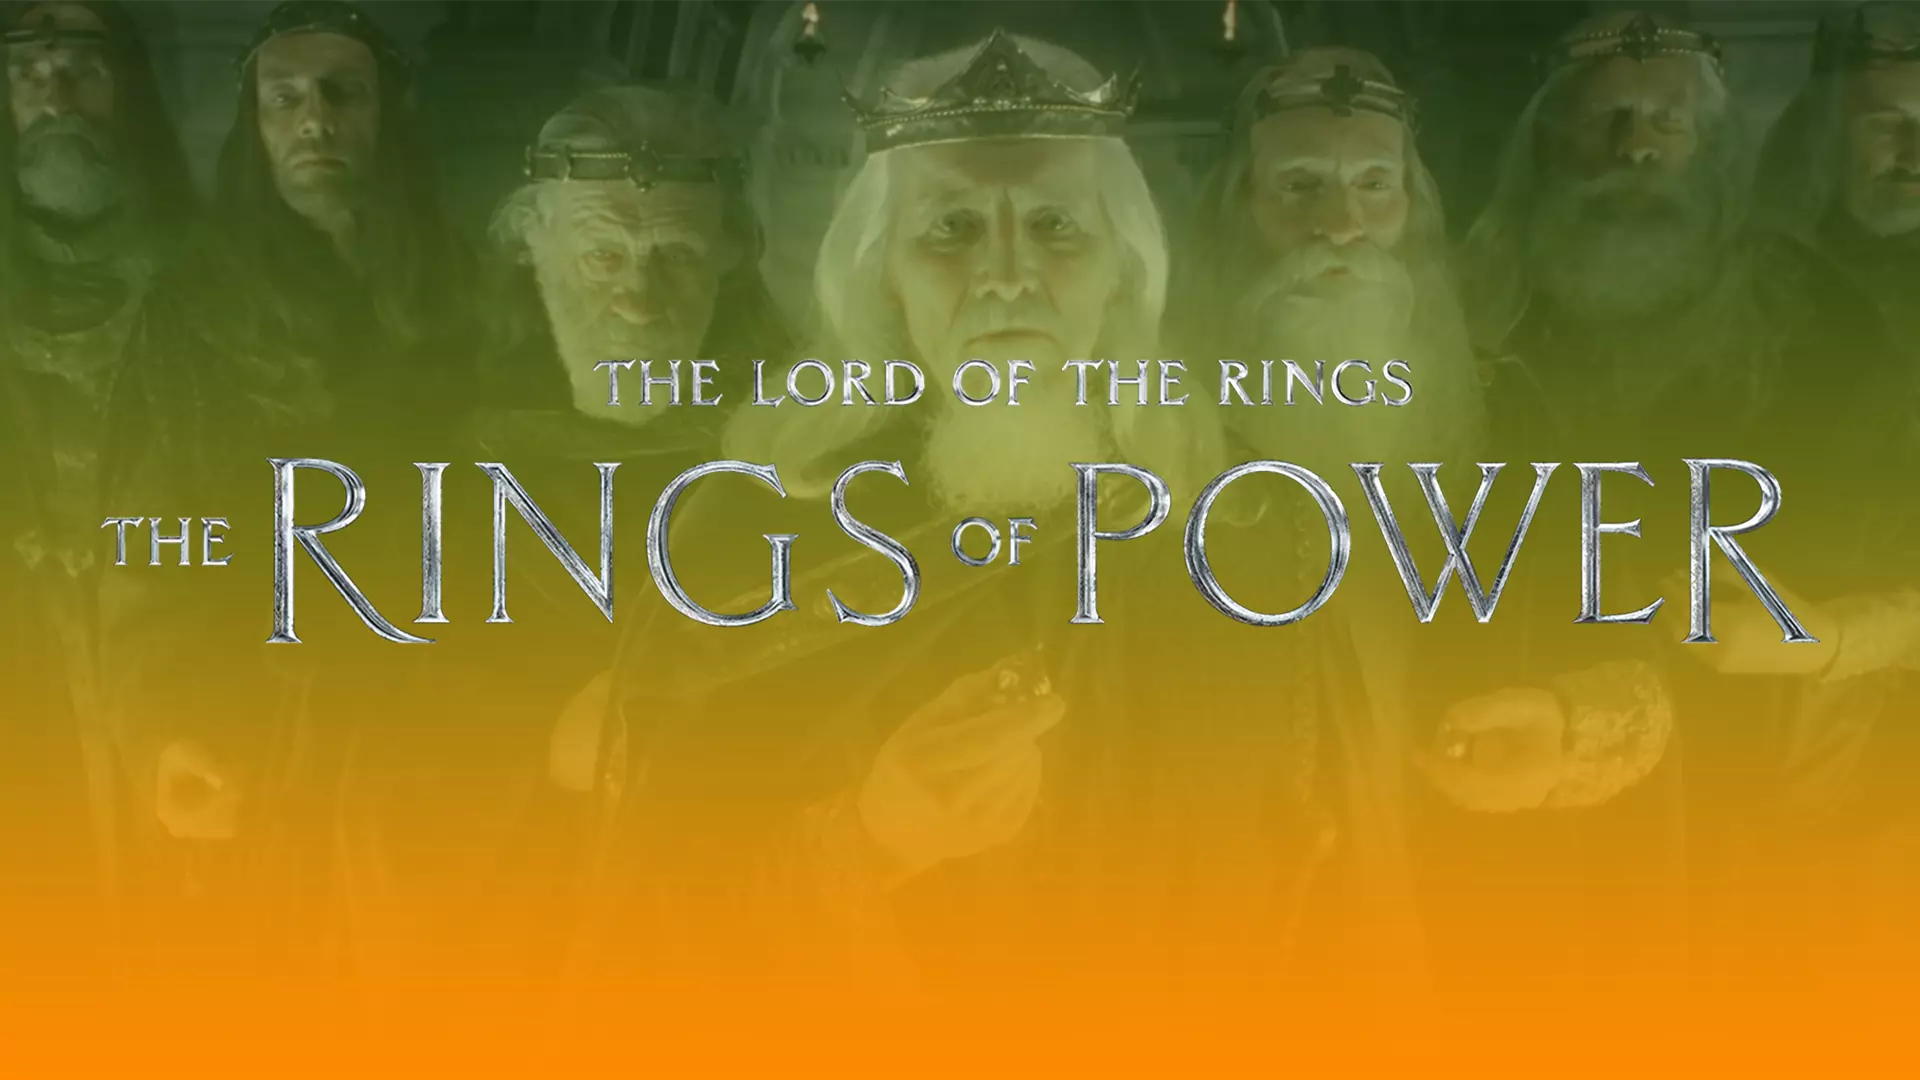 The new Lord of the Rings series sets a viewing record on Amazon Prime